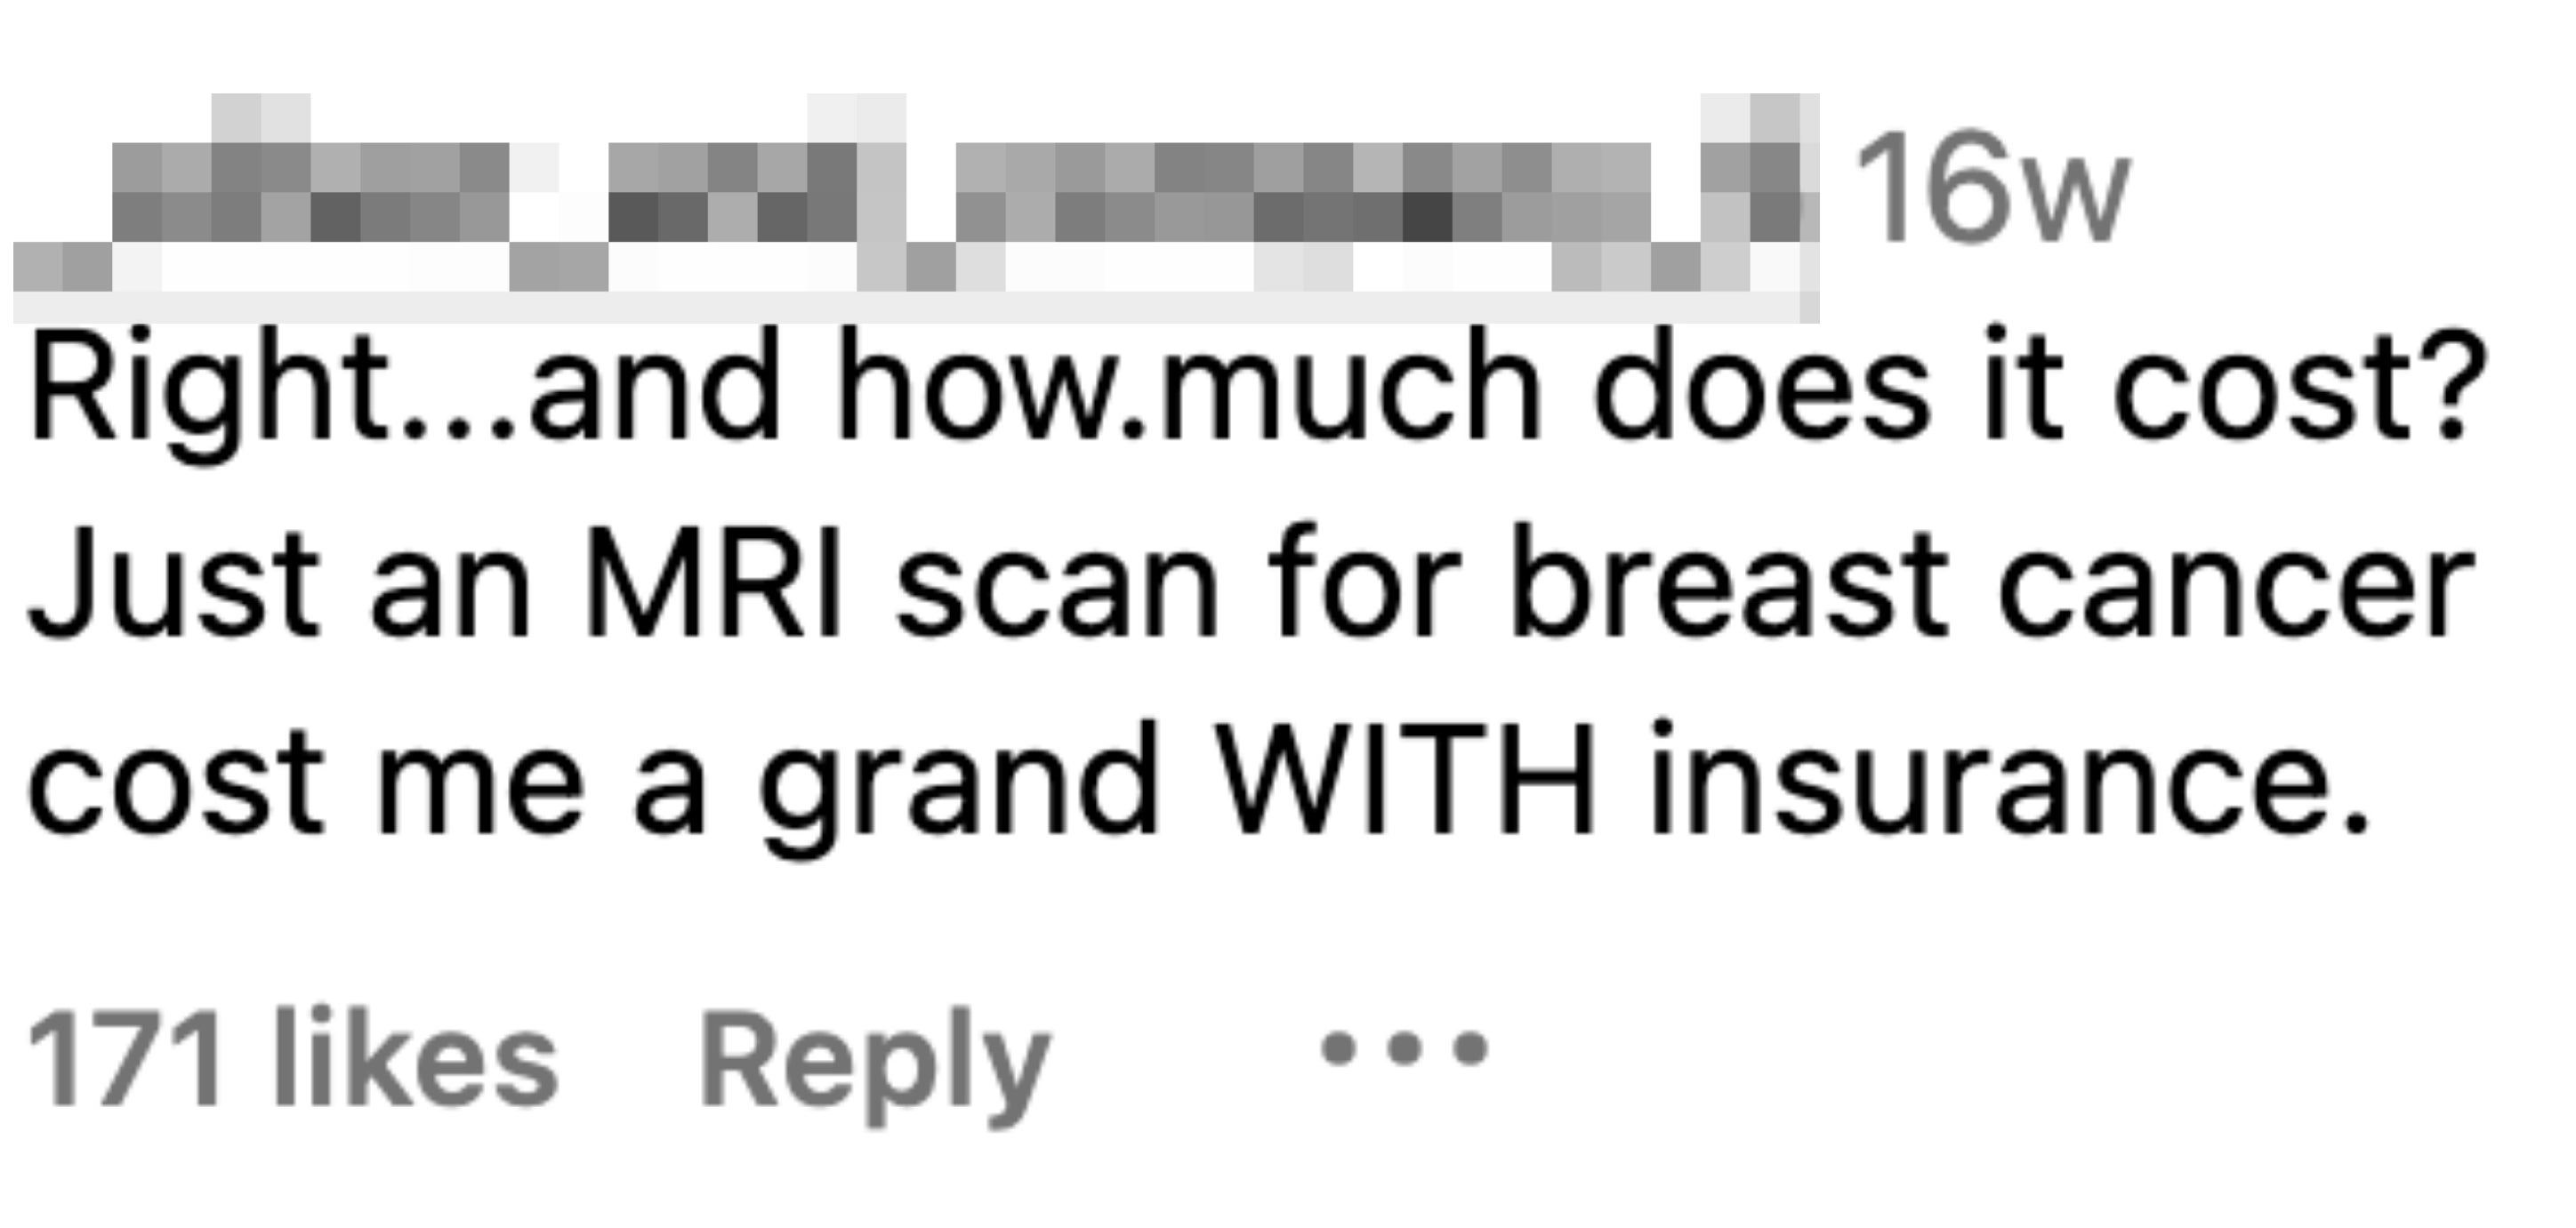 commentor asking how much it cost because they paid a grand with insurance for an MRI scan for breast cancer